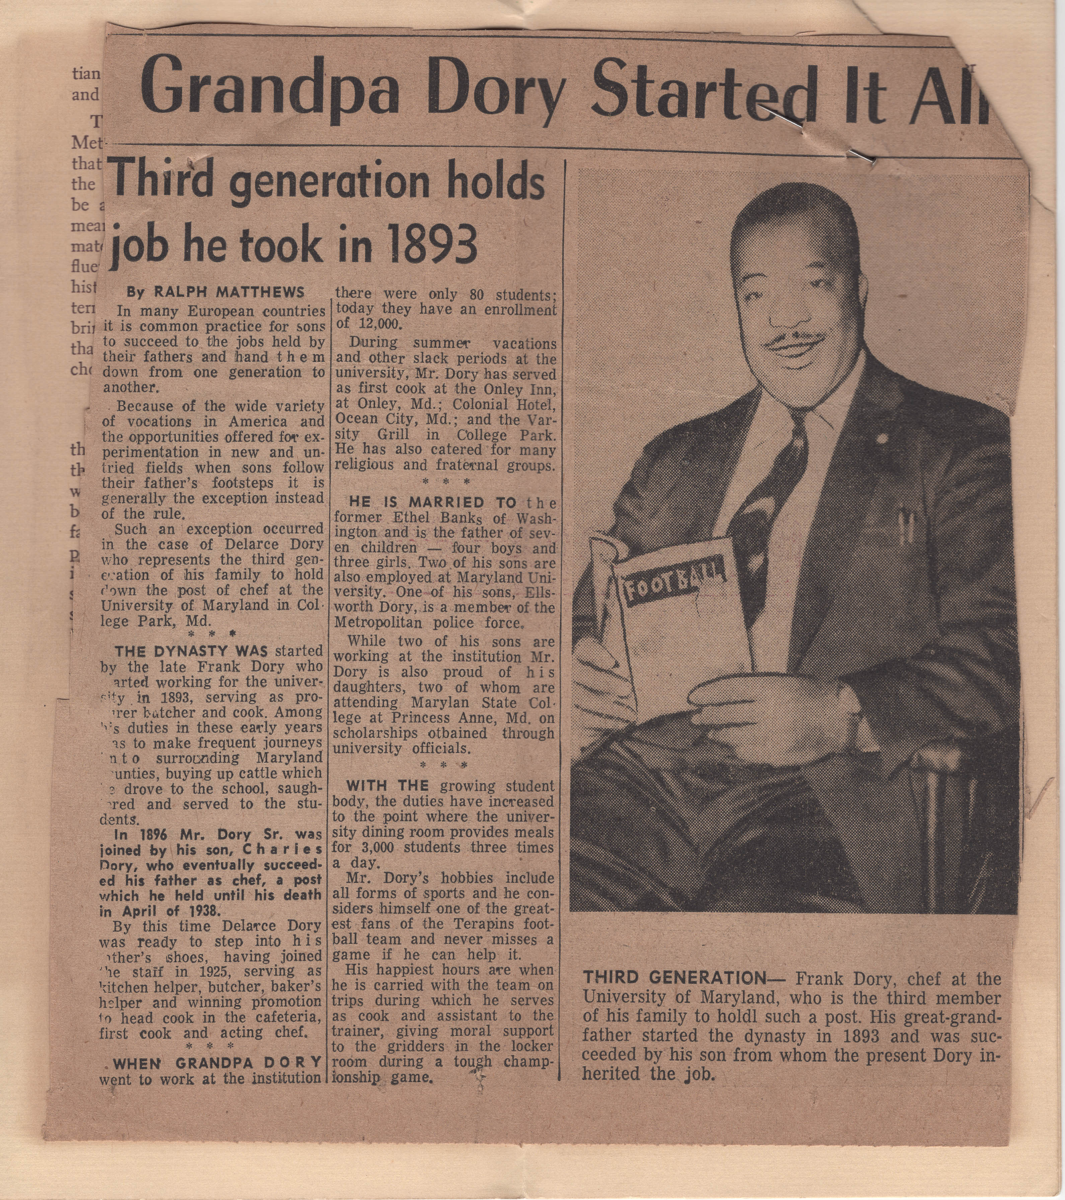 Newspaper clipping of Frank Dory.